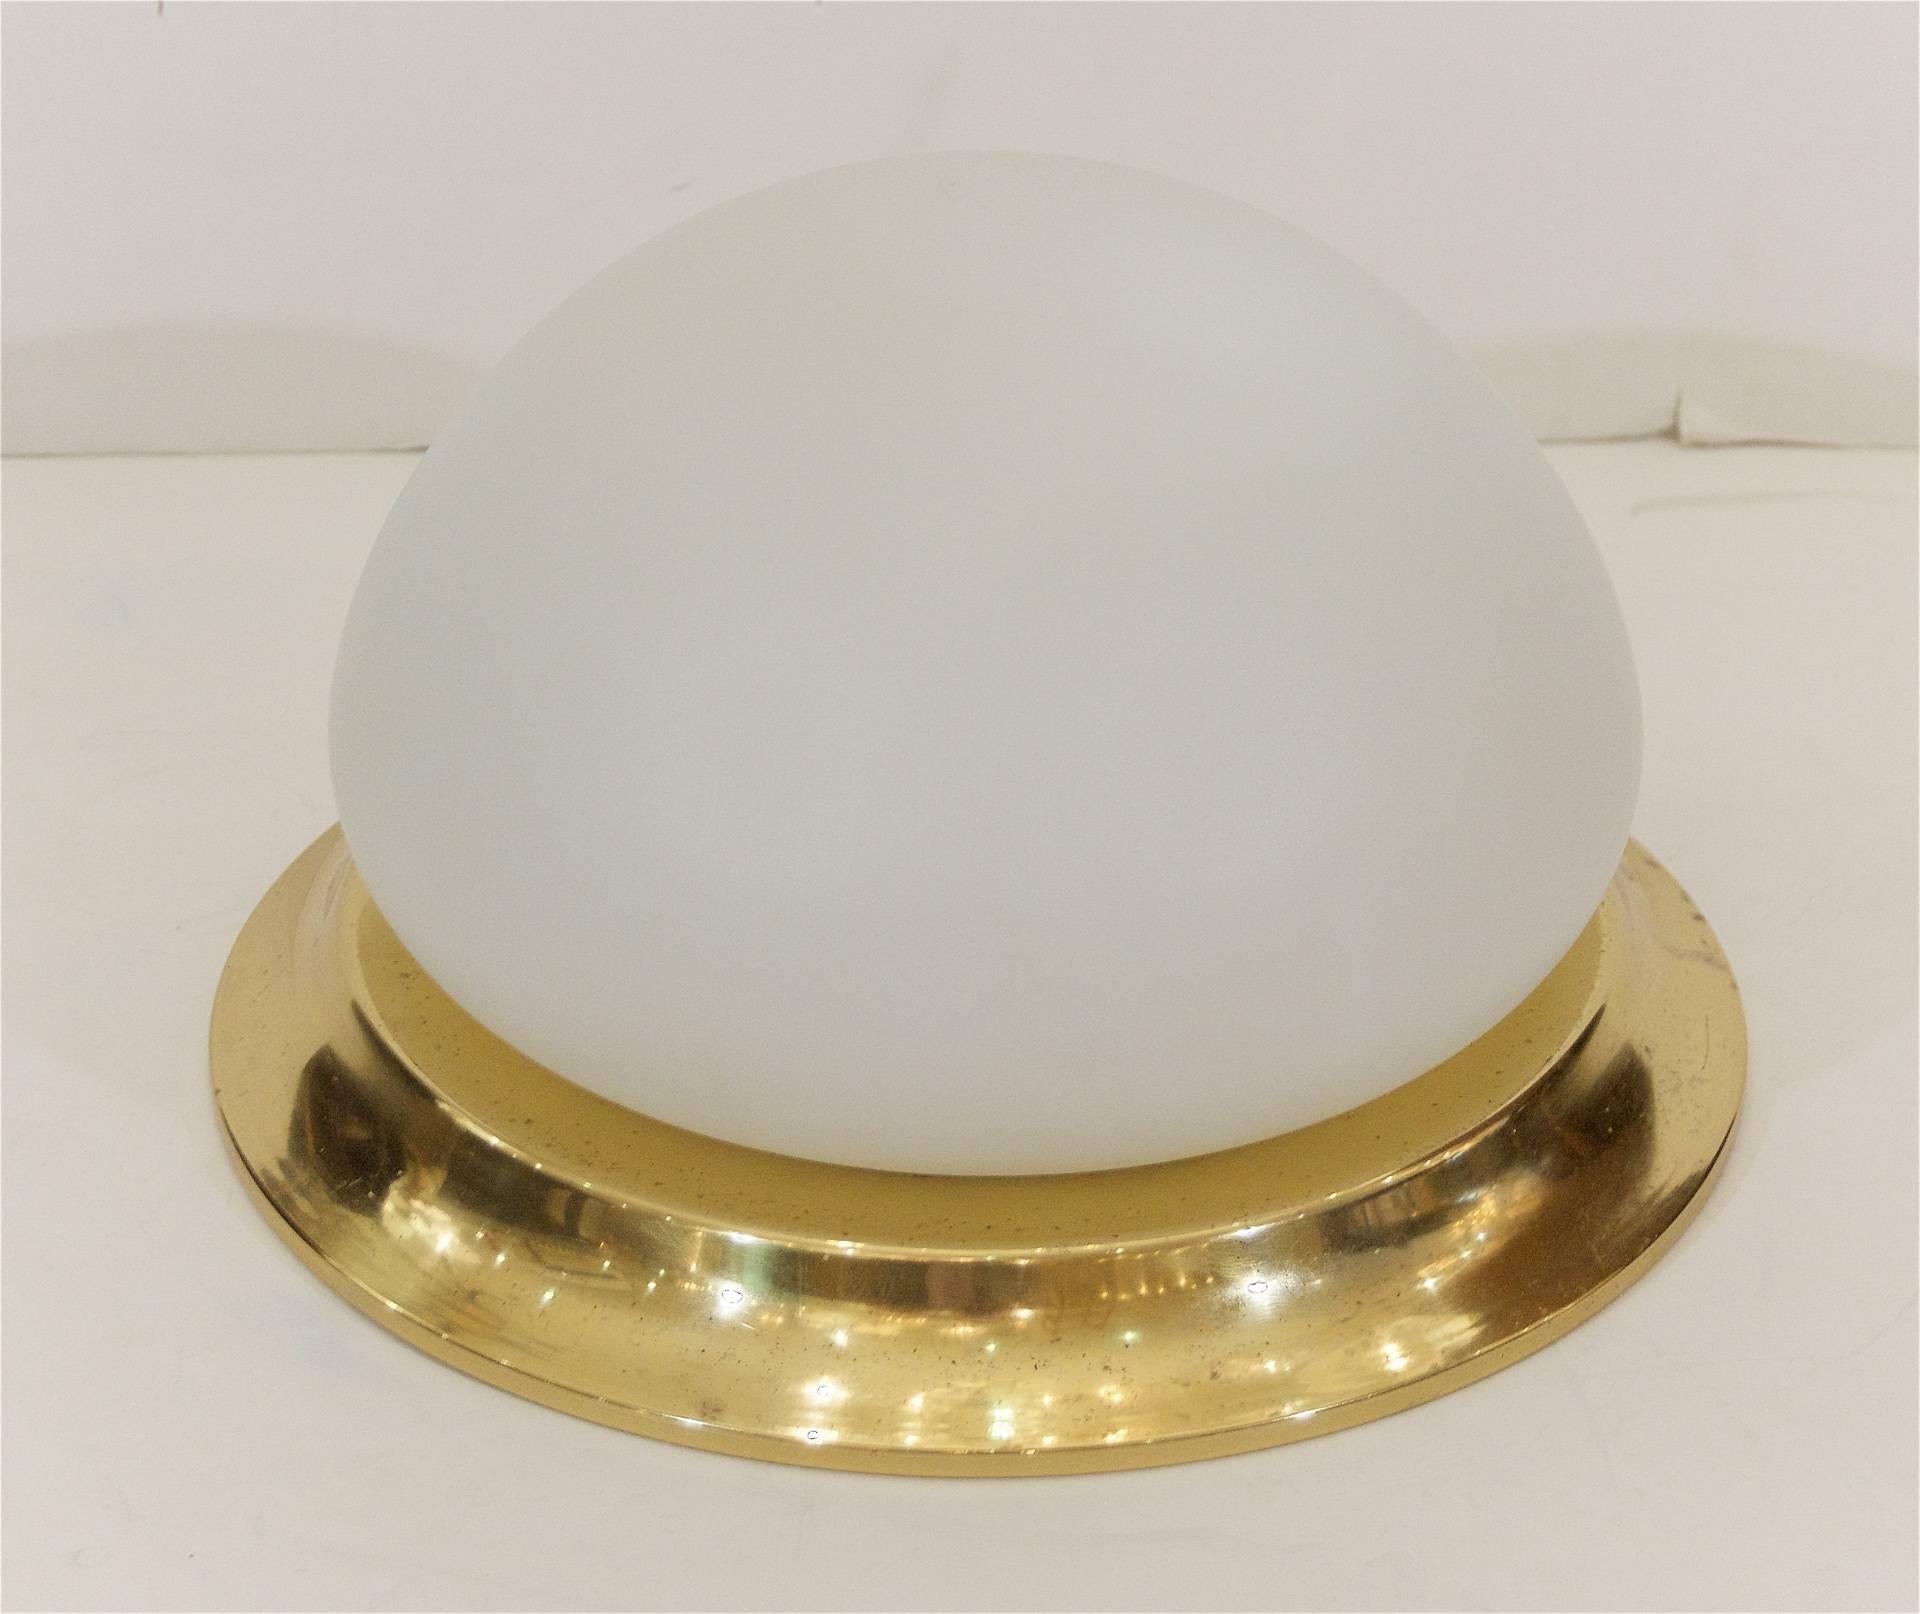 Well sized domed opal glass flush mount with a brass surround. 

Takes one medium base bulbs up to 60 watts per bulb. New wiring. 

Price listed is per fixture. Two available.